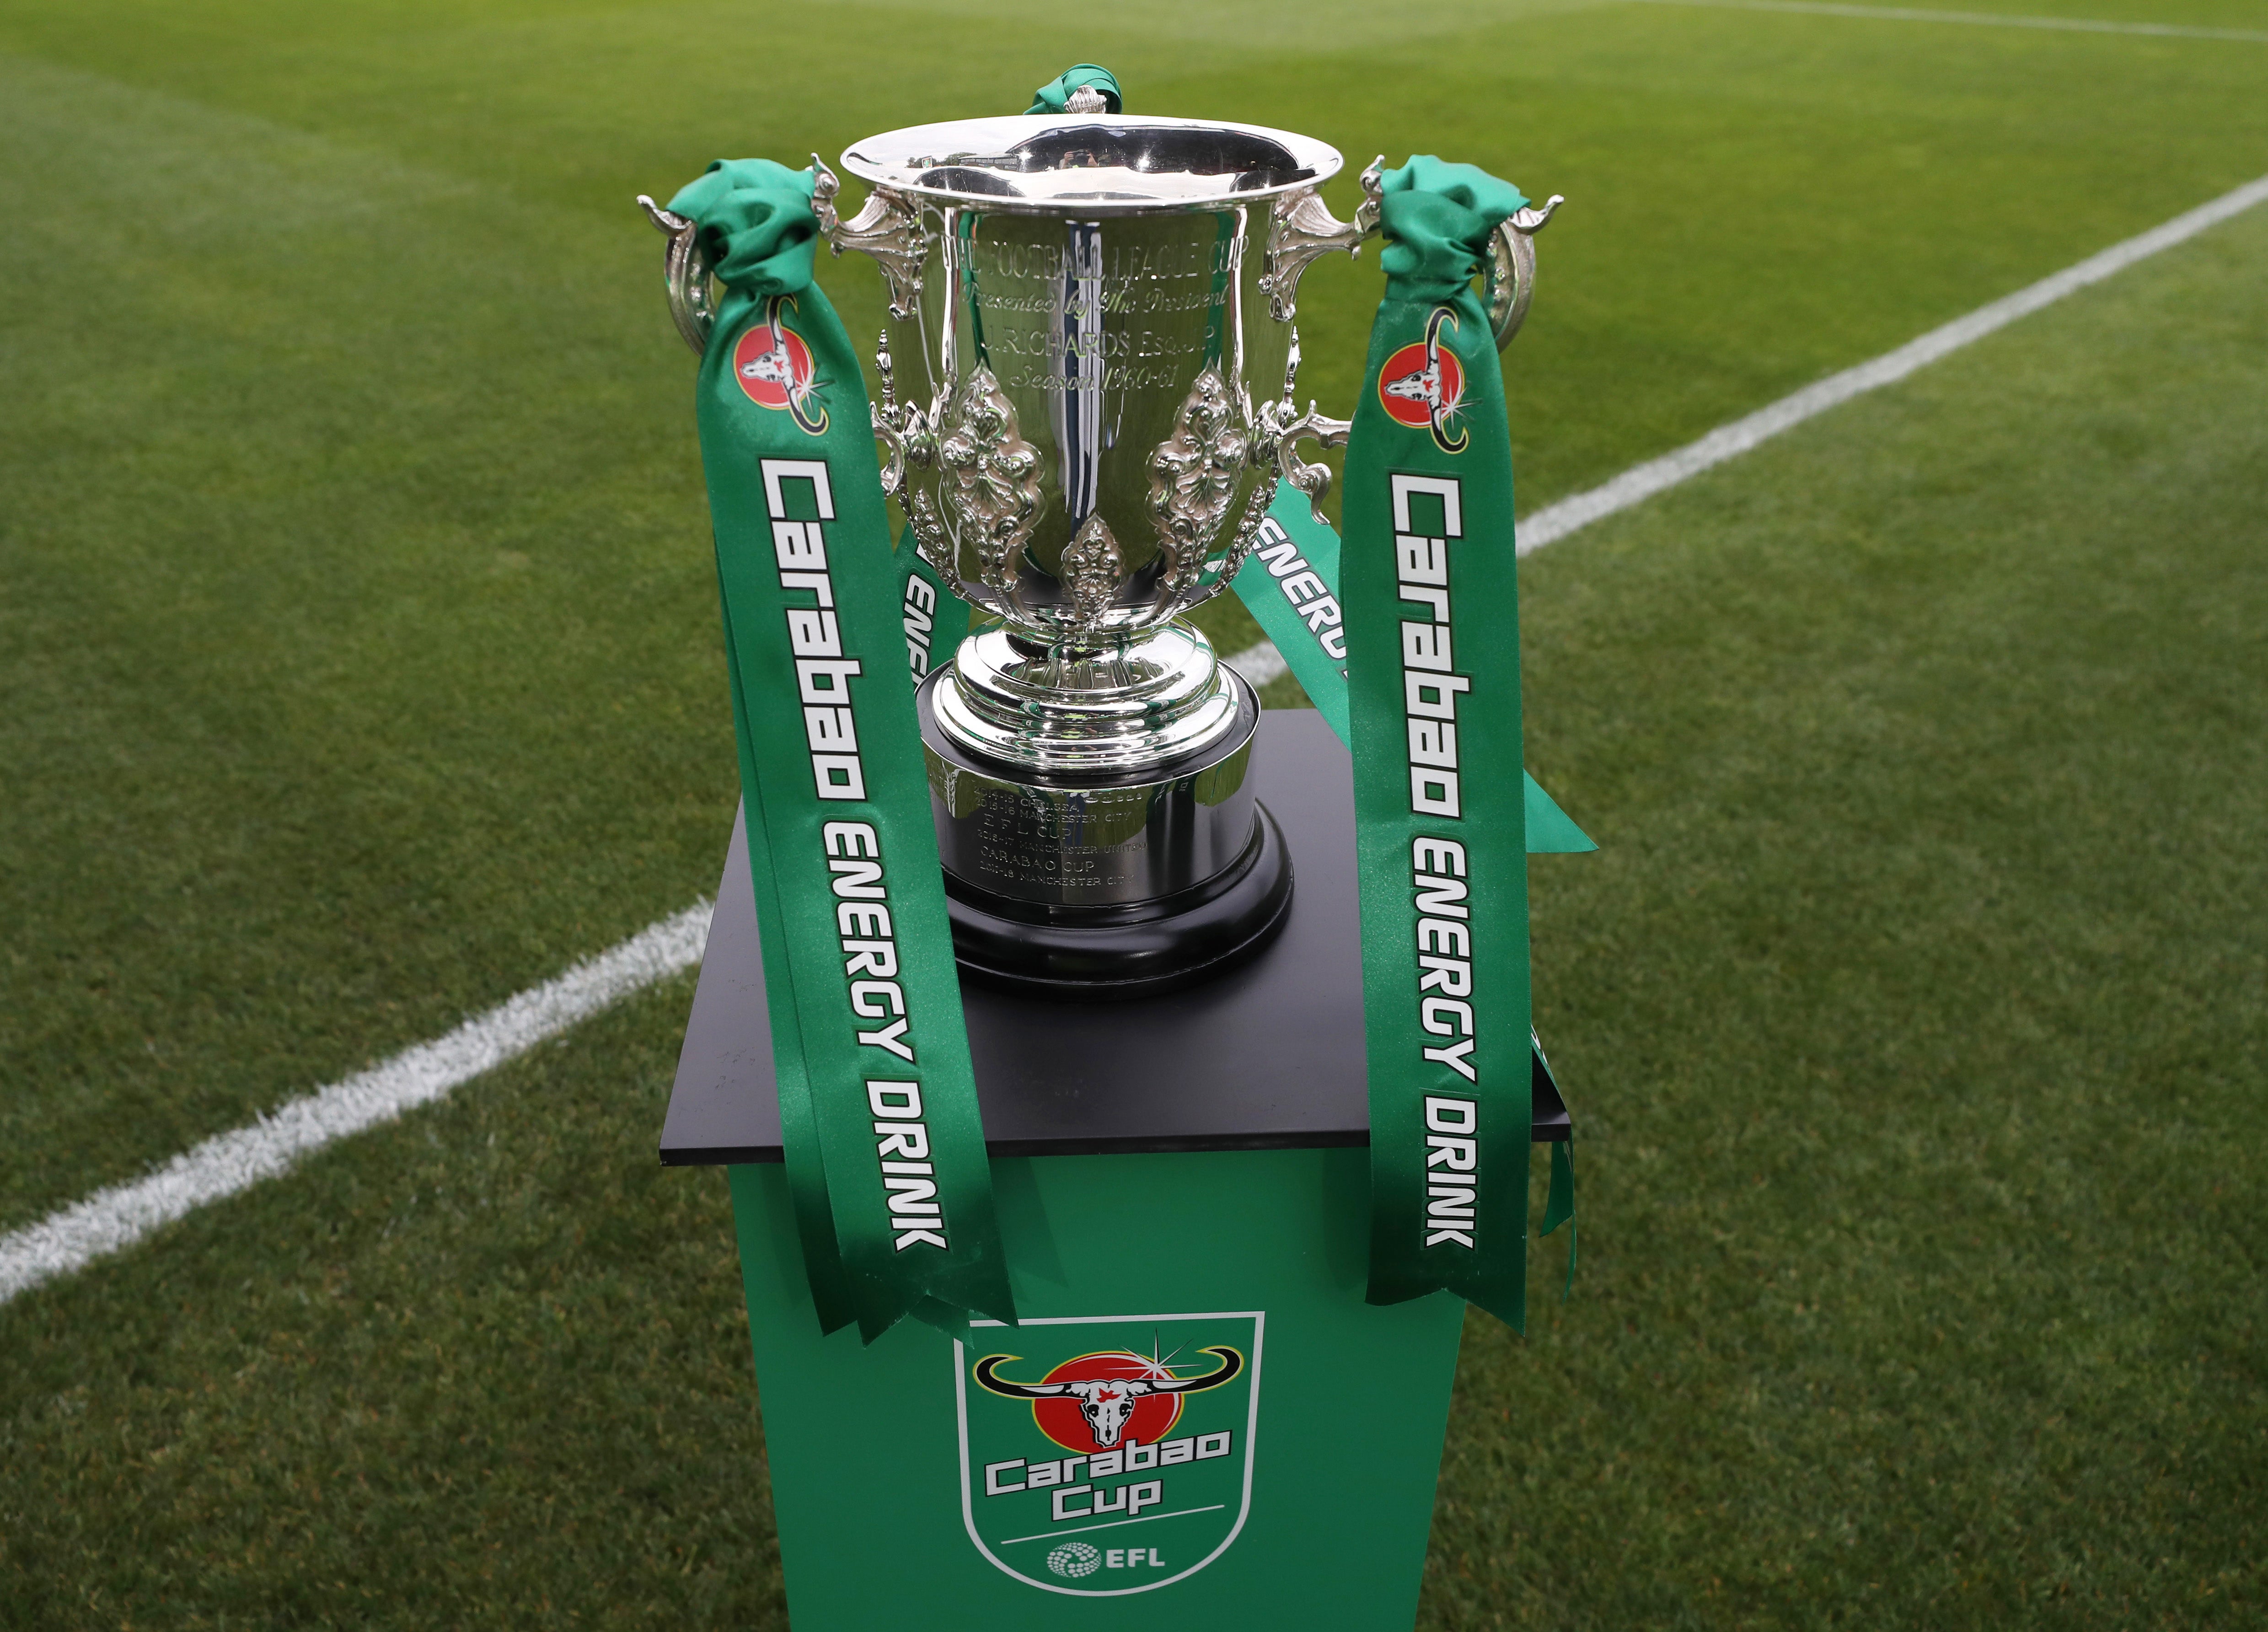 The third round of the Carabao Cup will be decided